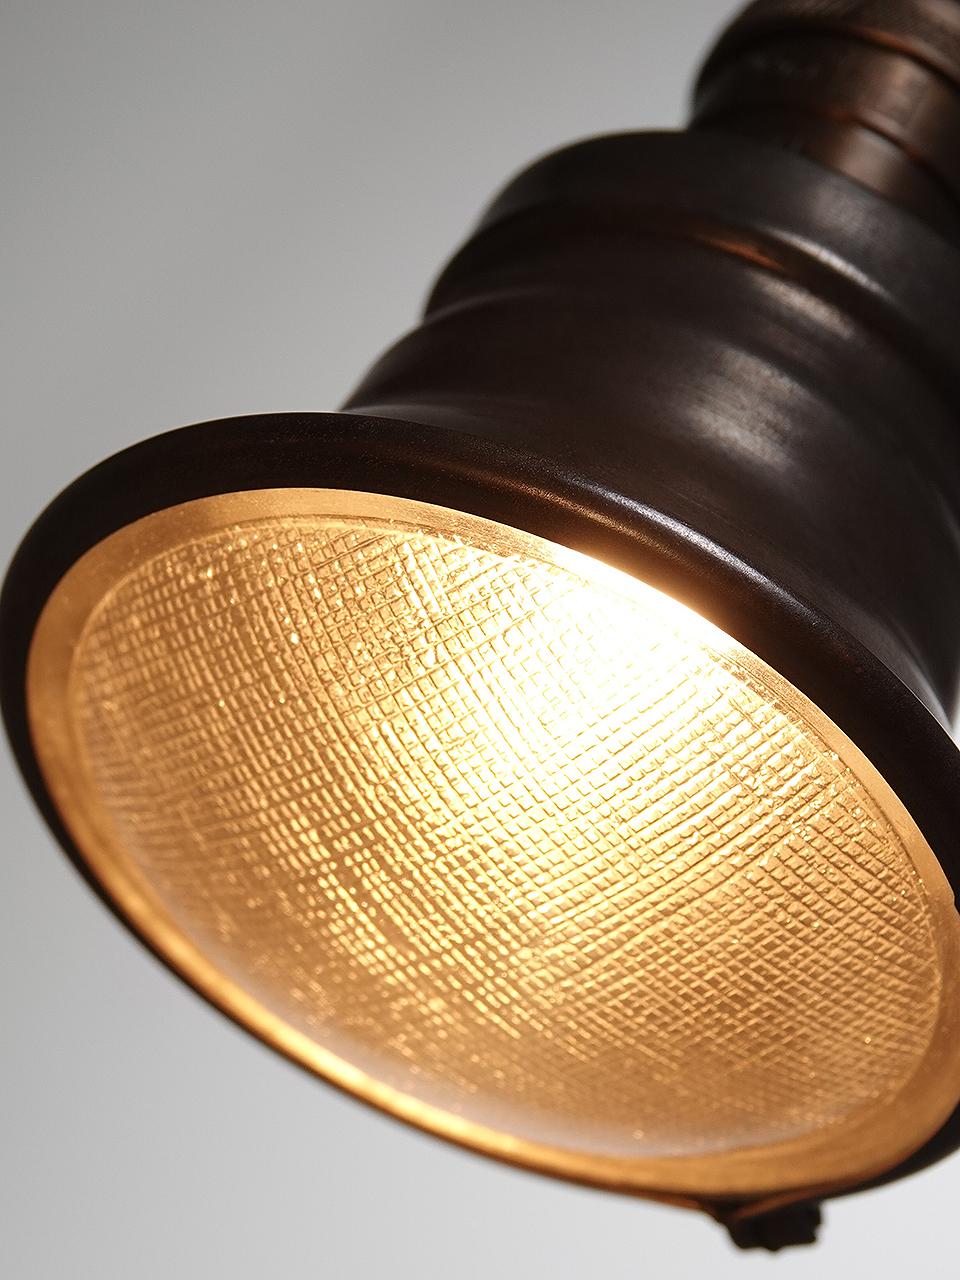 Pictured are mini spot pendants. They come in a dark brass finish. A brass ring holds a 3.75 inch textured glass lens. The look is as simple and elegant as it gets. They are priced per lamp.